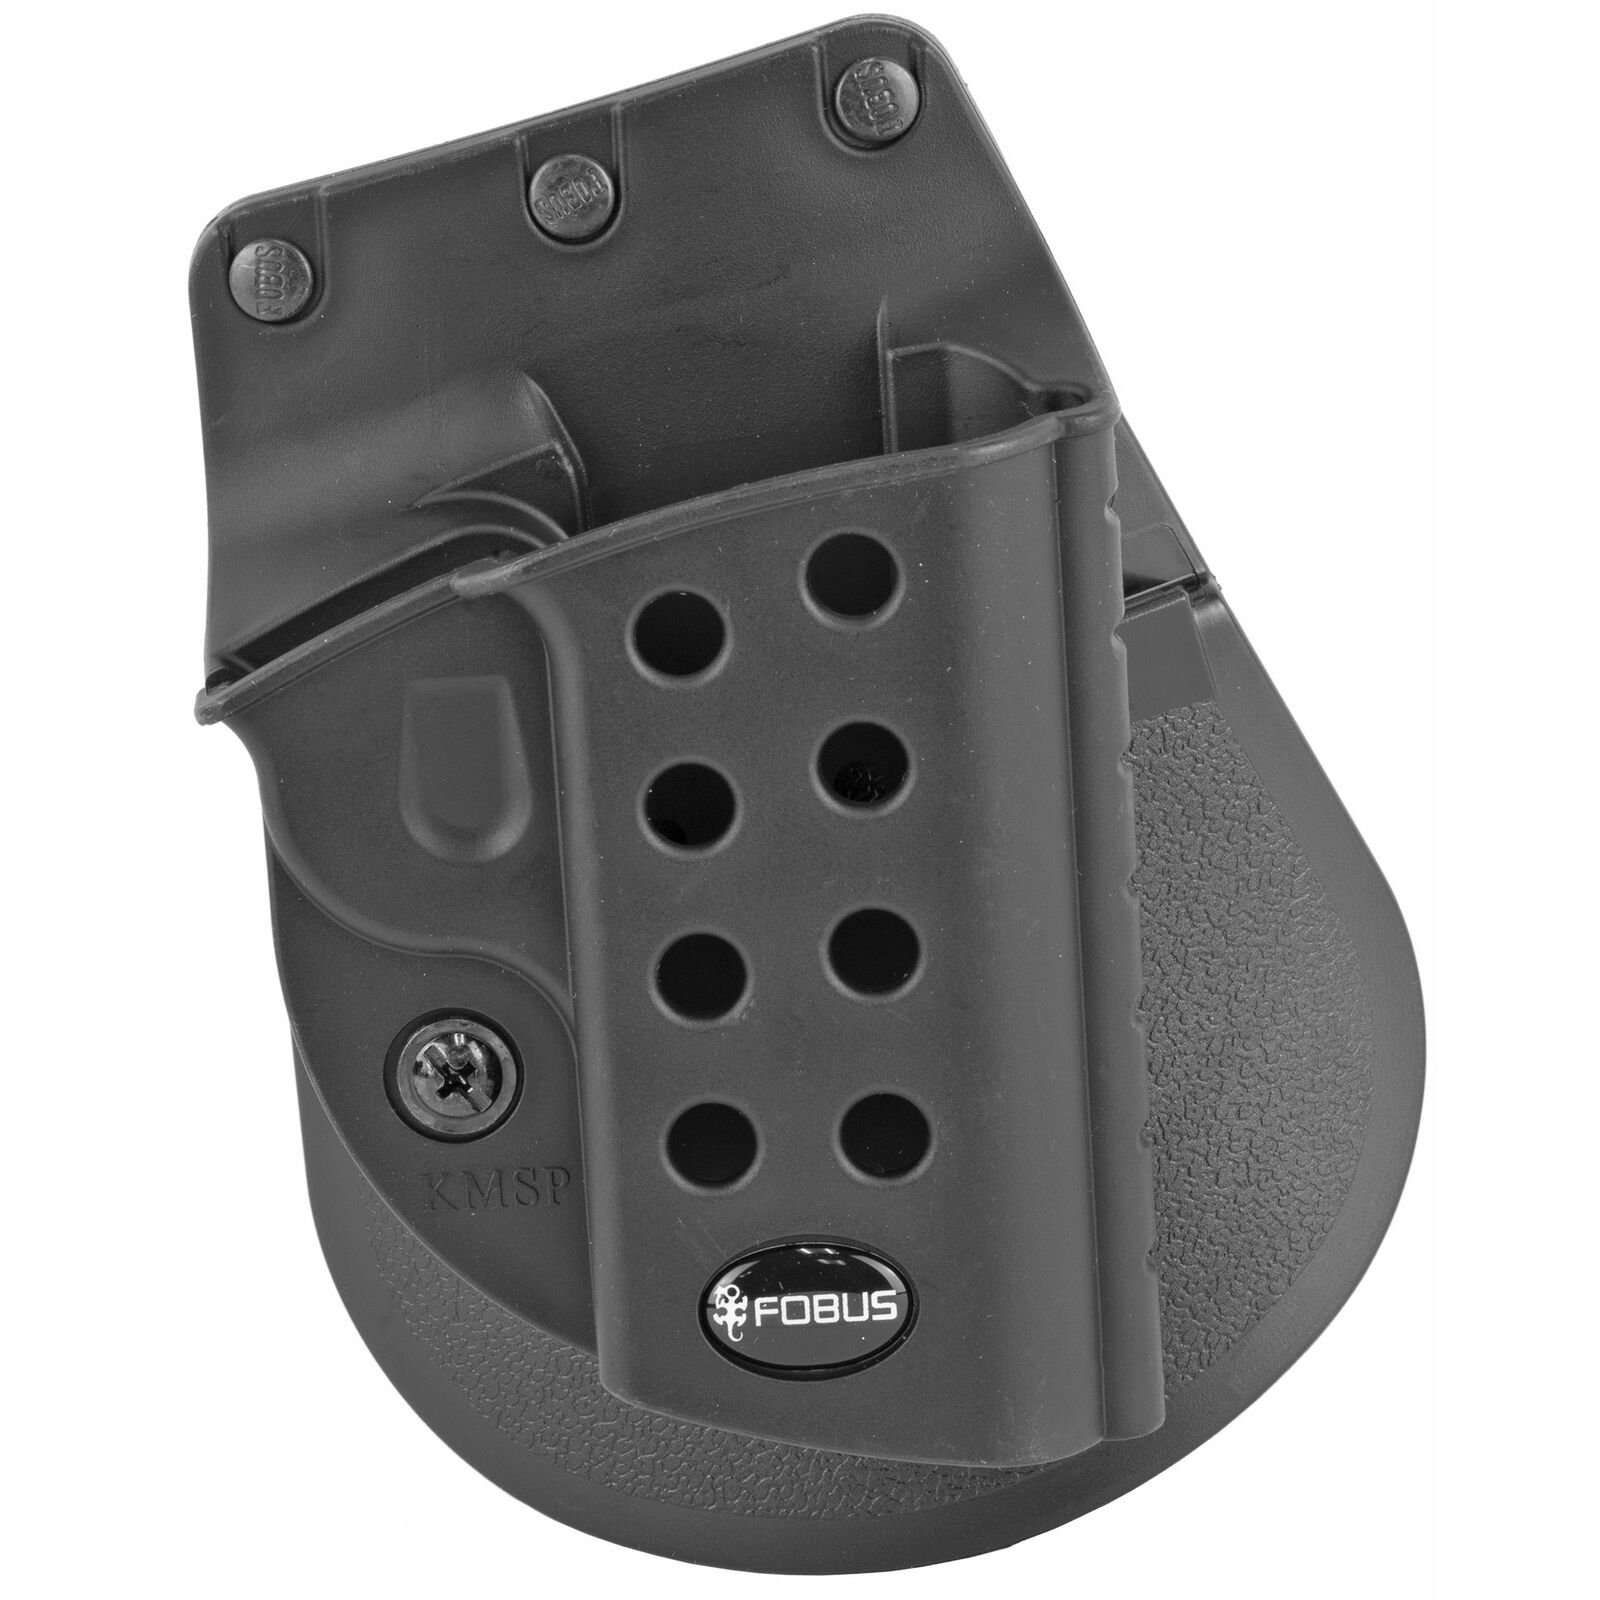 FOBUS R1911 Evolution RH Kydex Paddle Holster For Colt 1911 With Or Without Rail